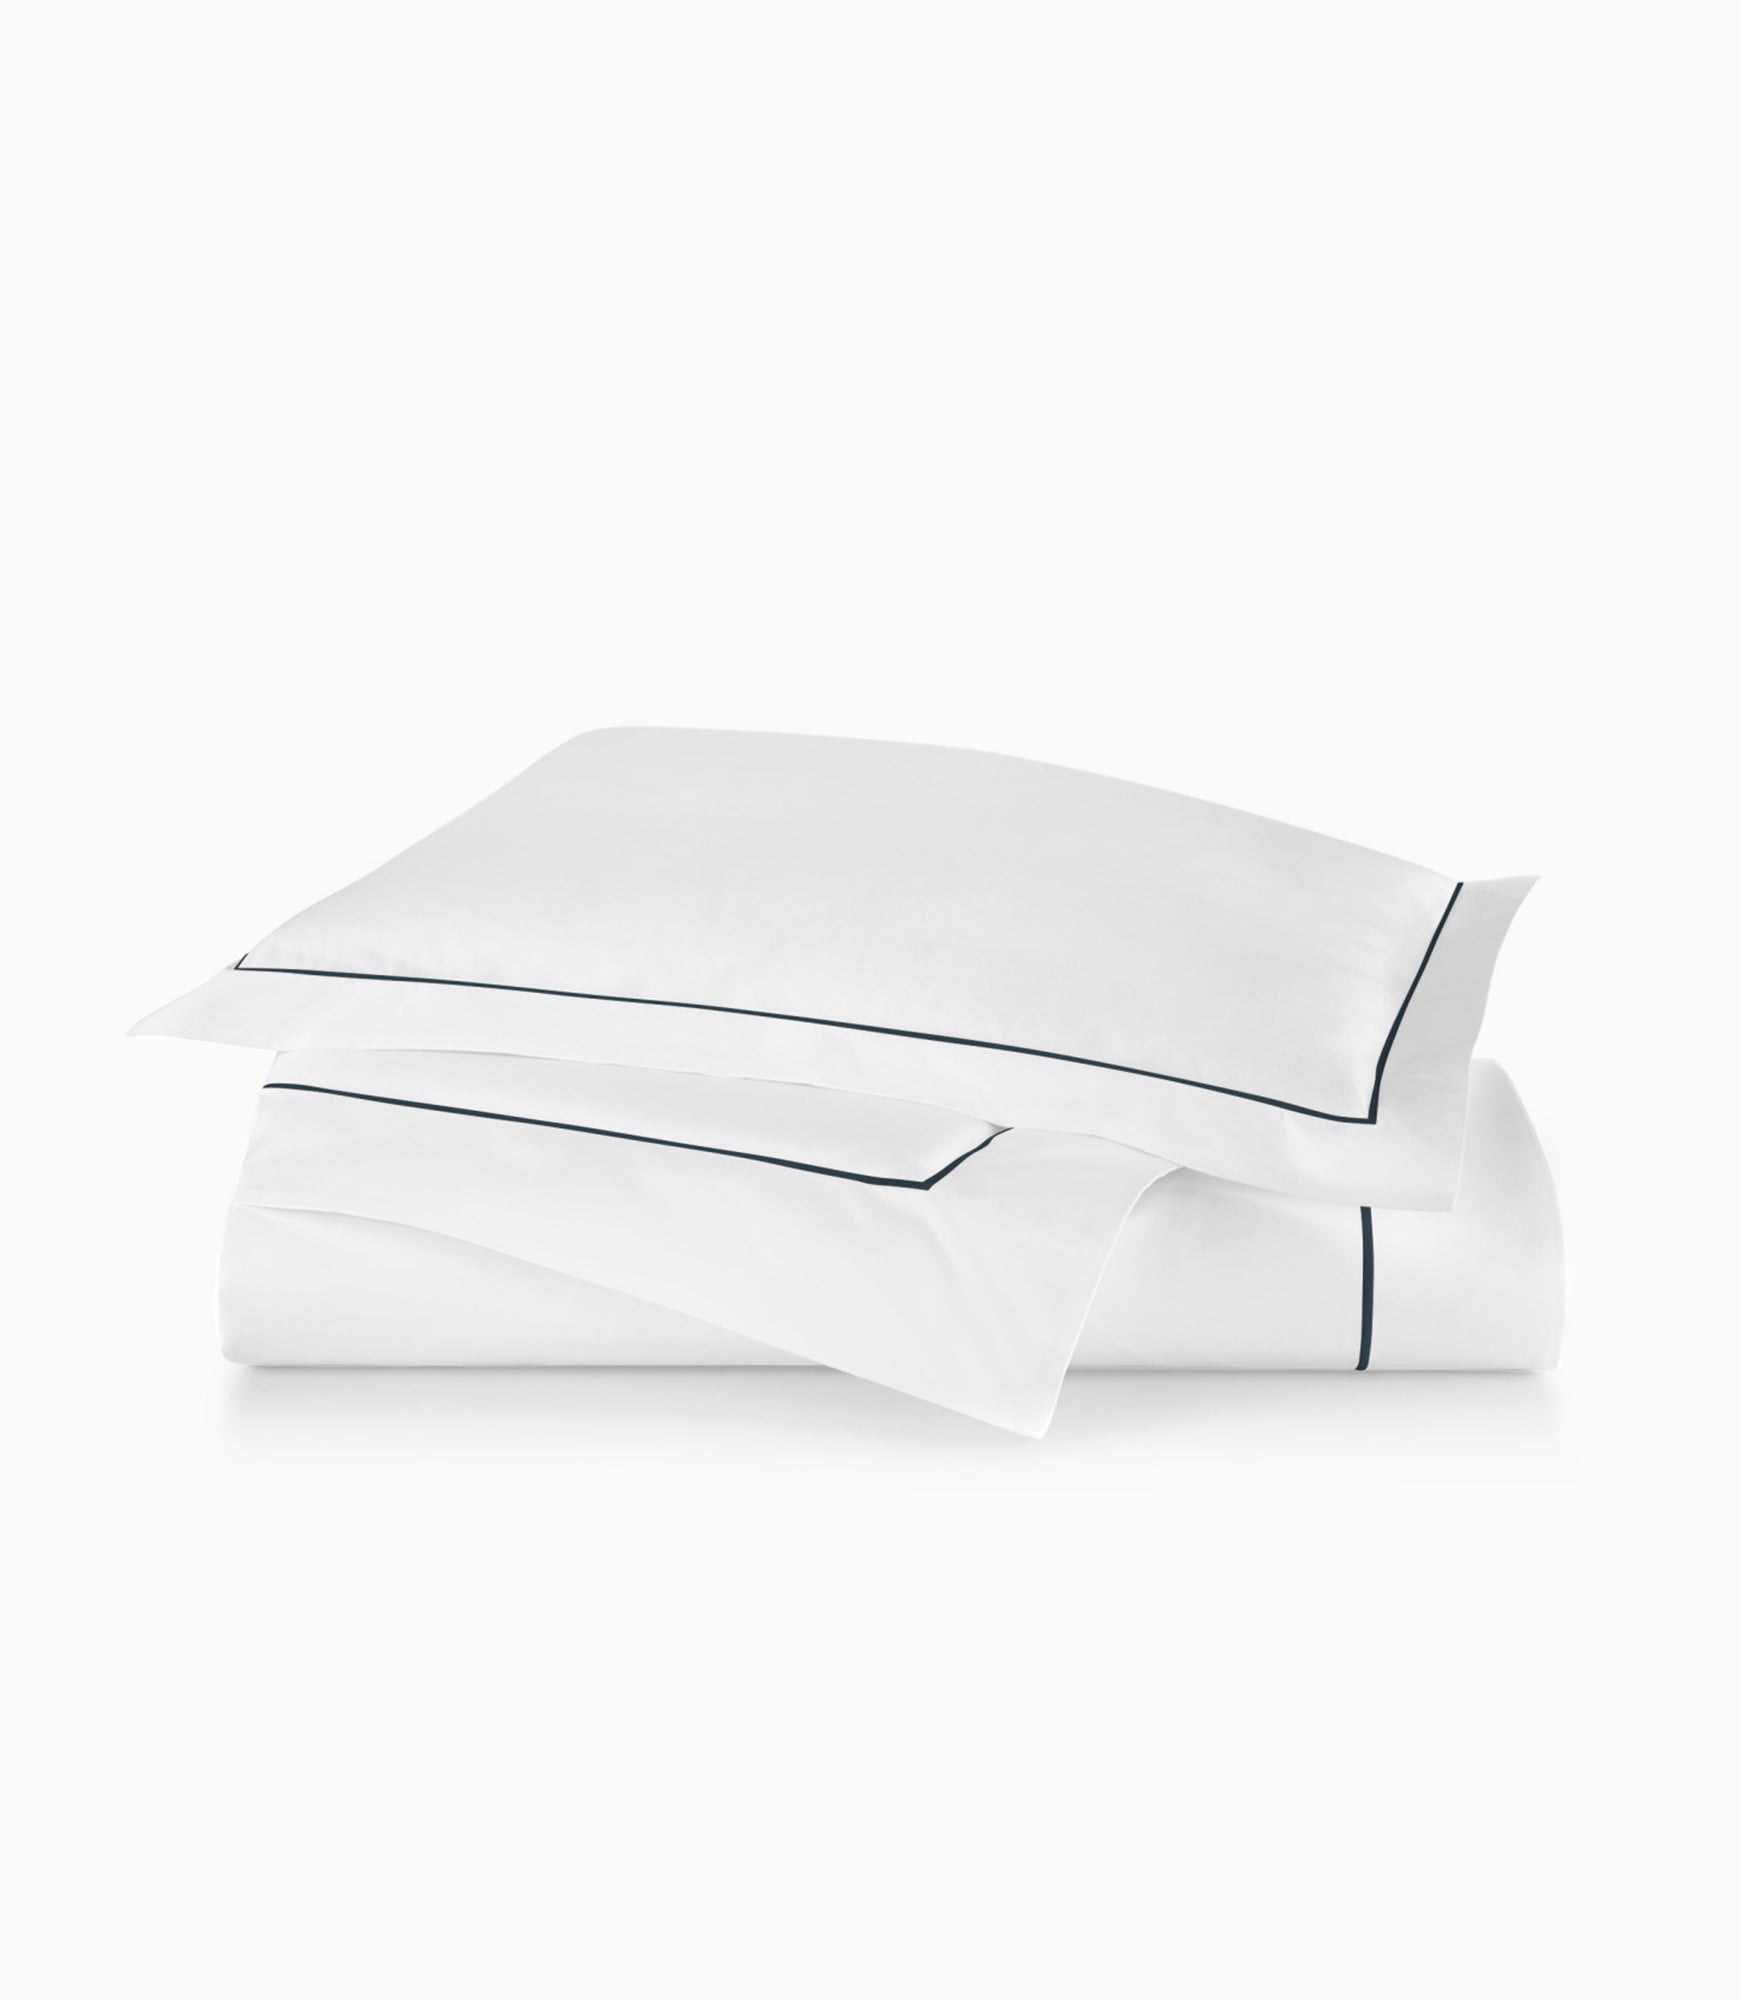 Area Pins Percale Duvet Cover